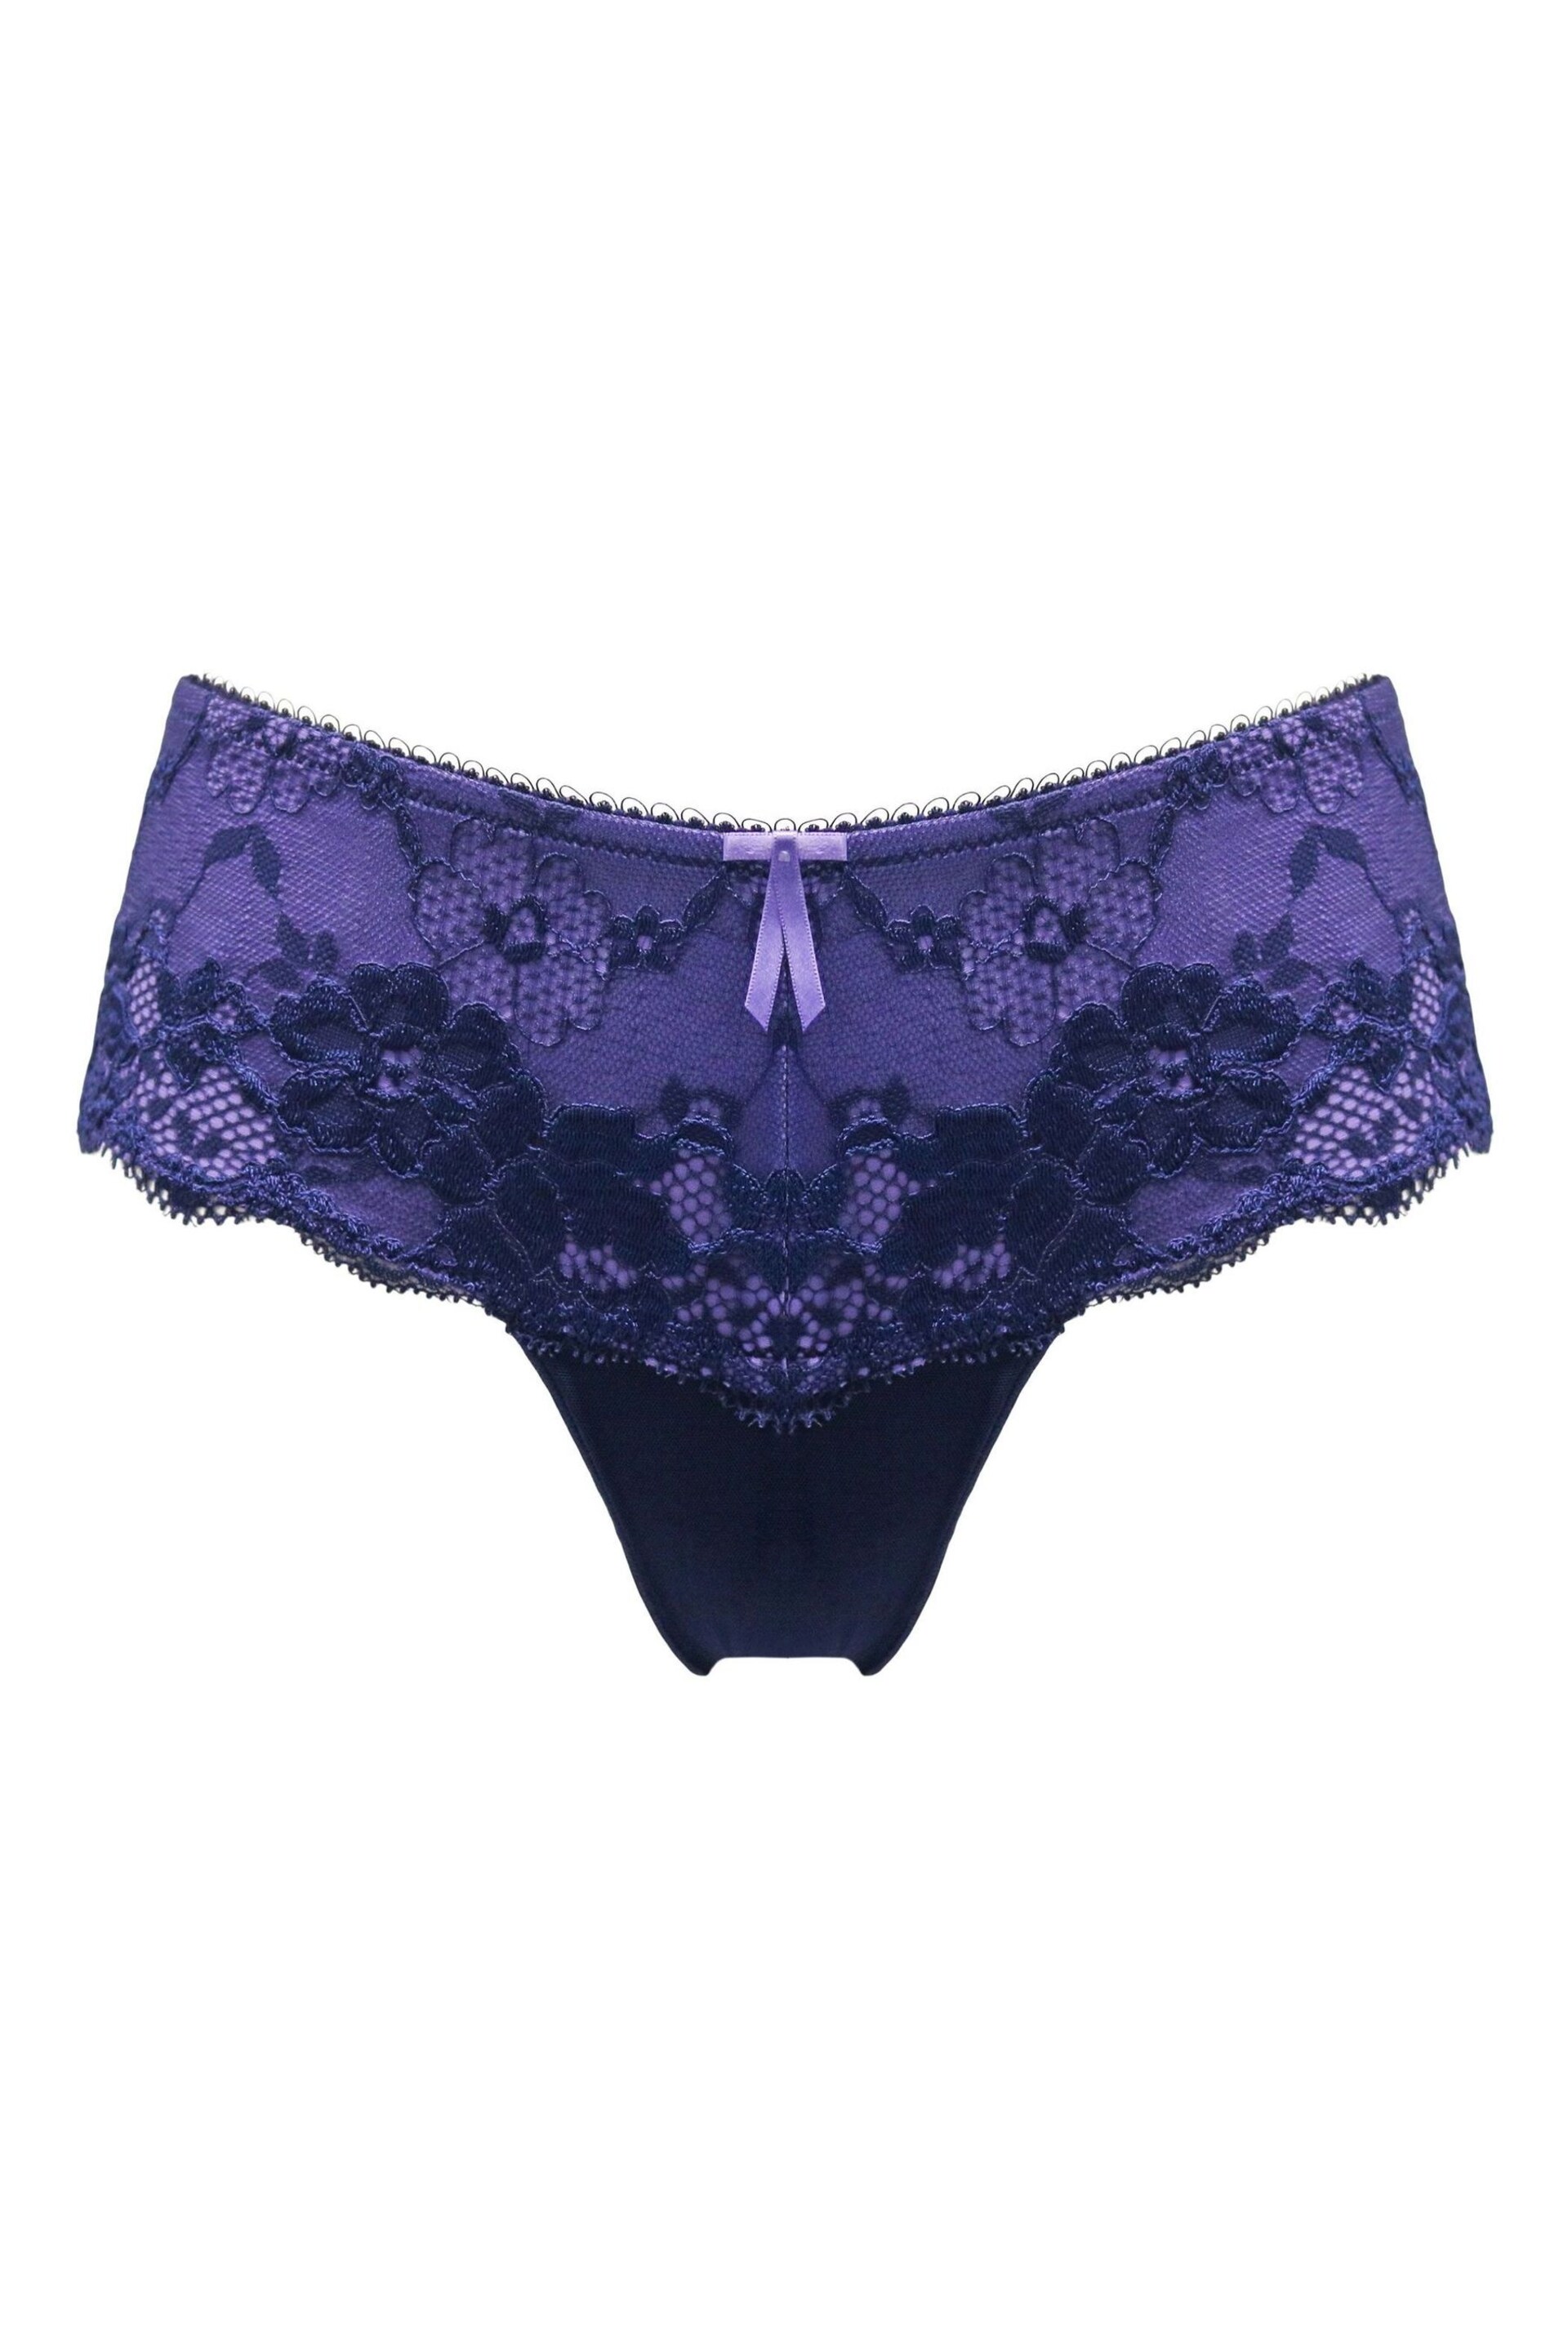 Pour Moi Blue Shorty Amour Knickers - Image 3 of 4